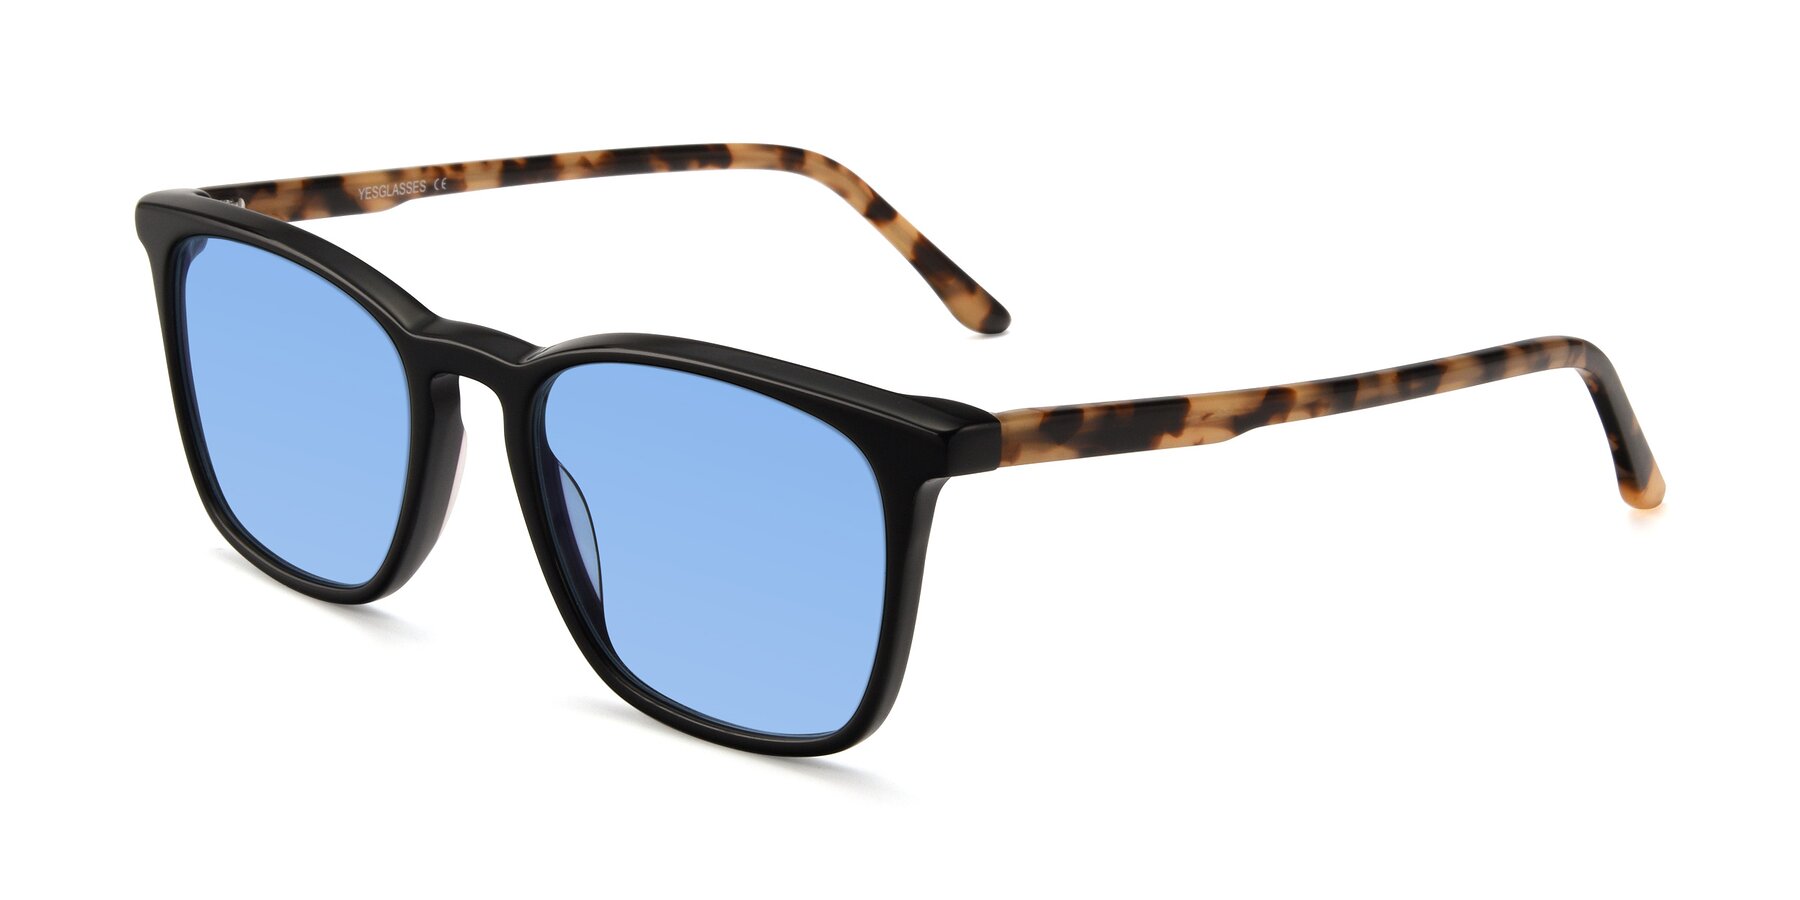 Angle of Vigor in Black-Tortoise with Medium Blue Tinted Lenses